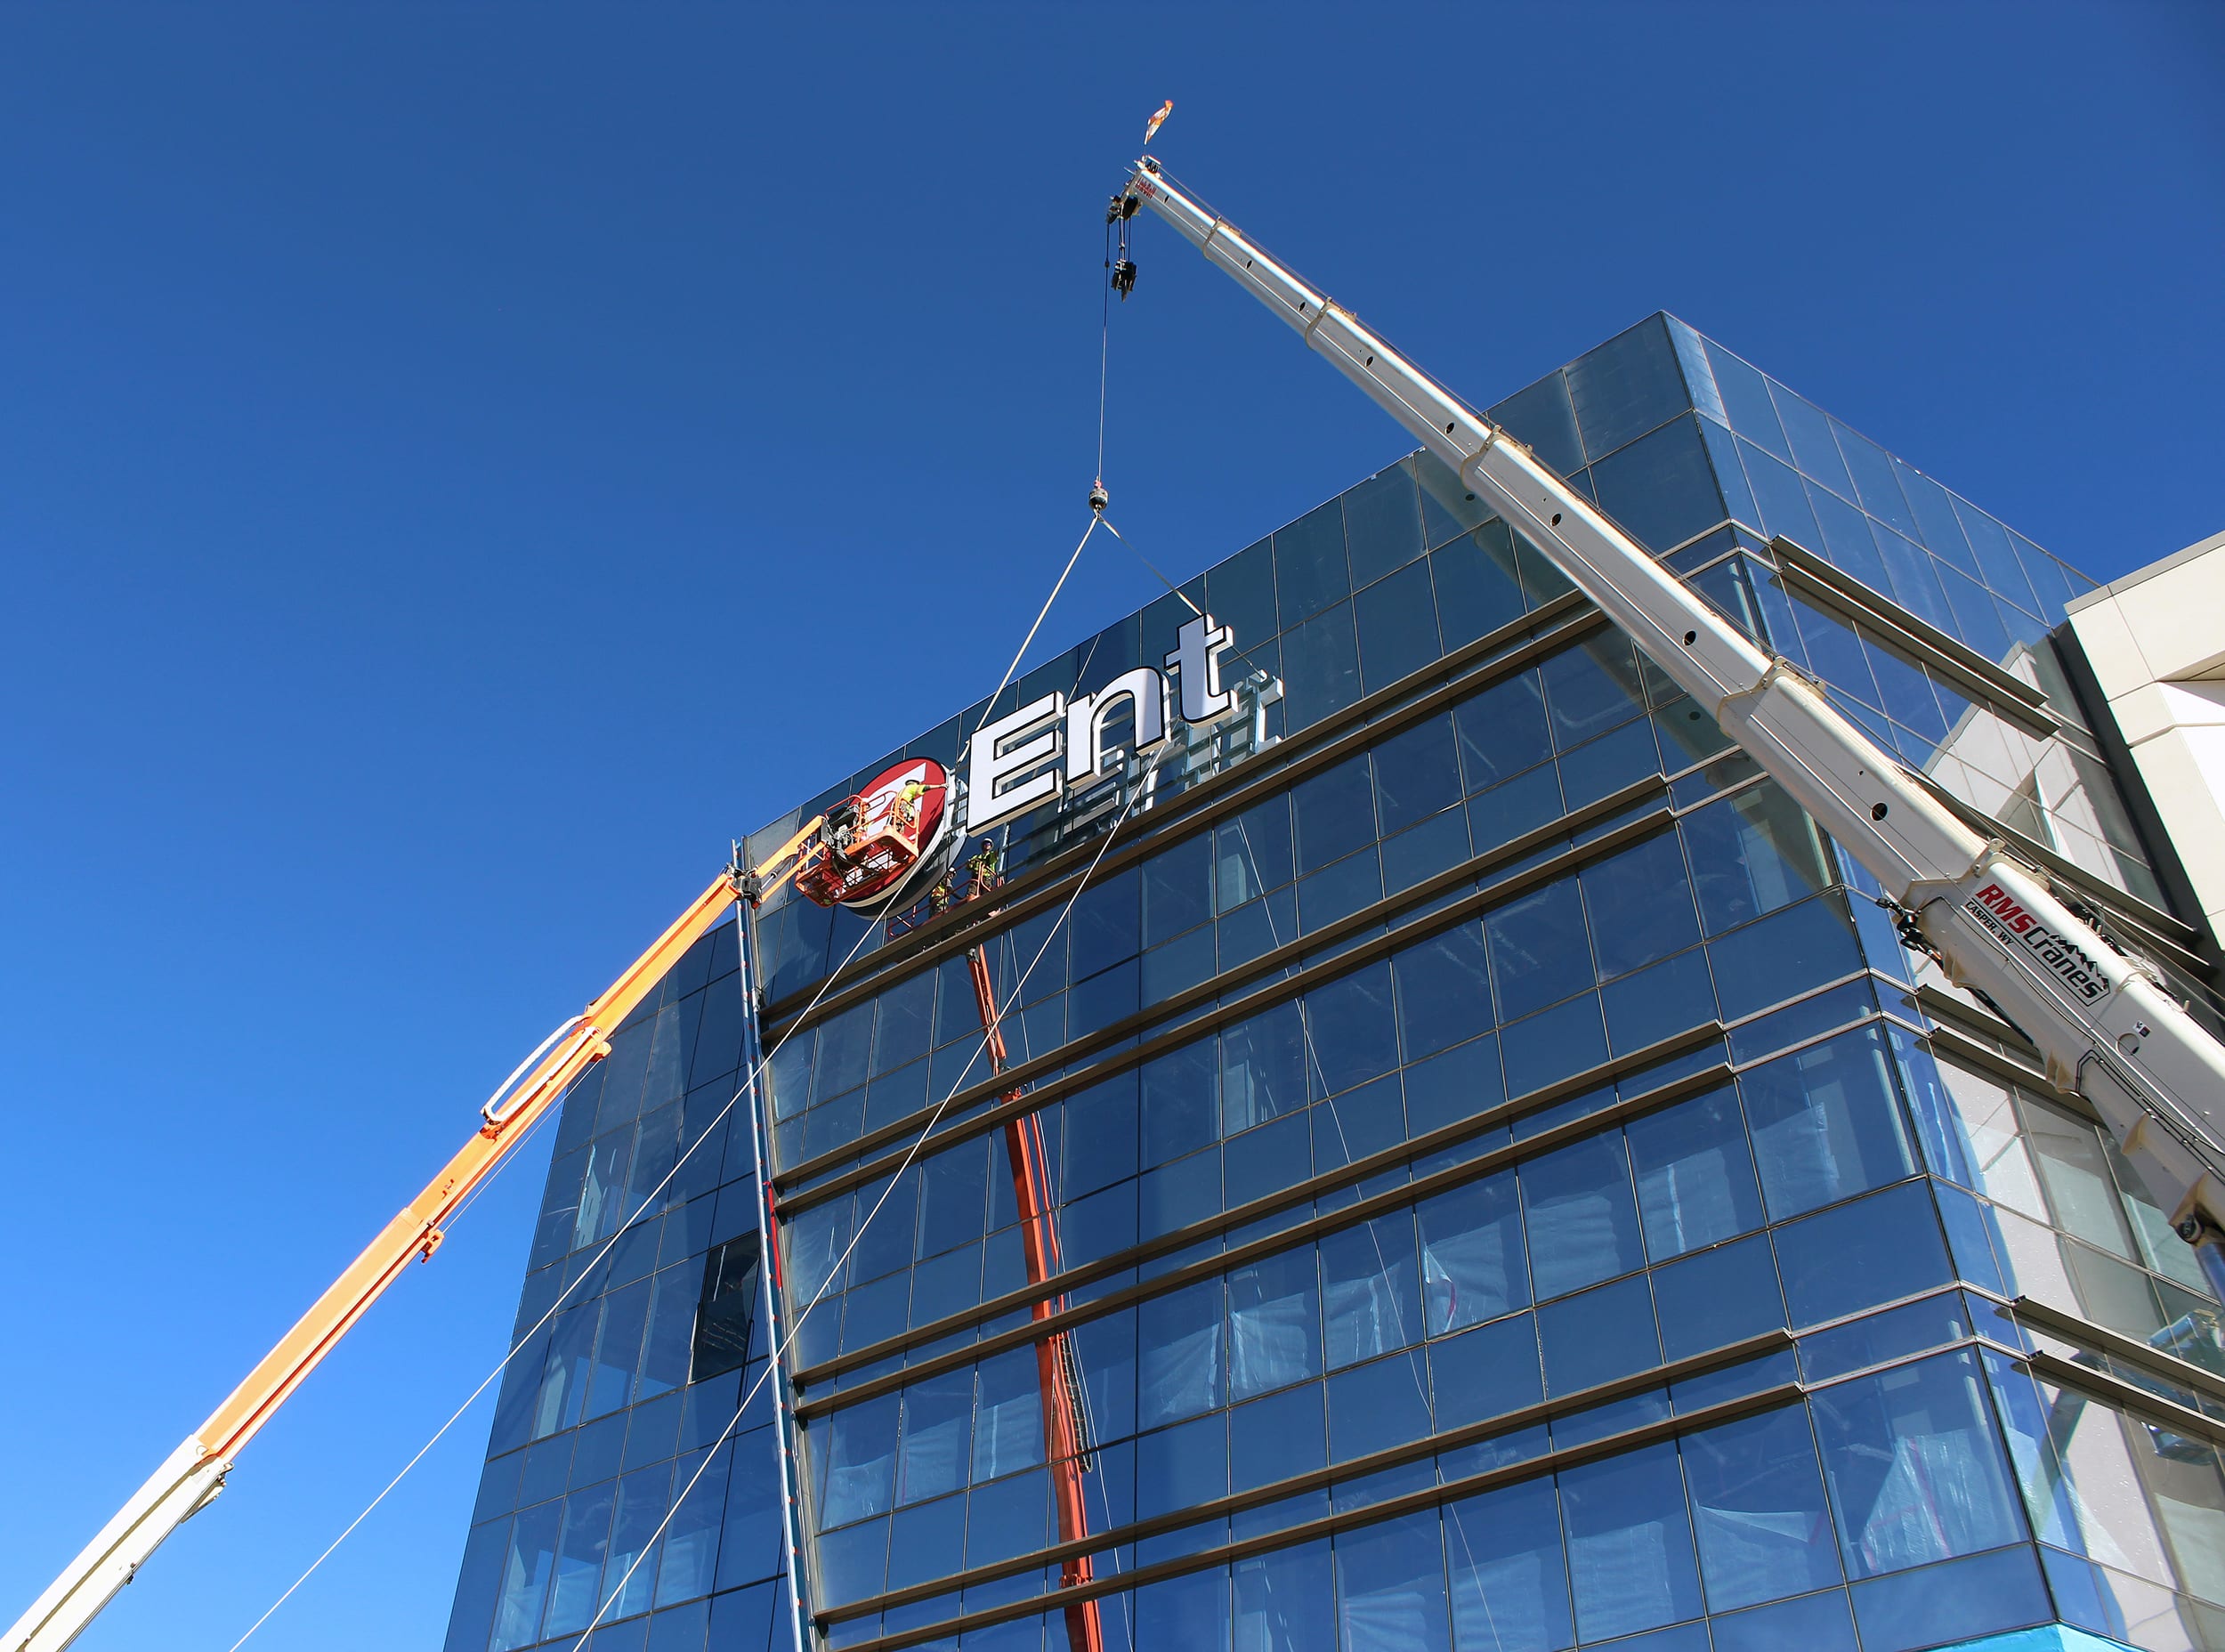 This install by Sign Shop Illuminated was unique as the sign had to be installed on the windows and required specific anchoring points and custom bracketing. Due to the height, additional cranes and a lift plan were critical.